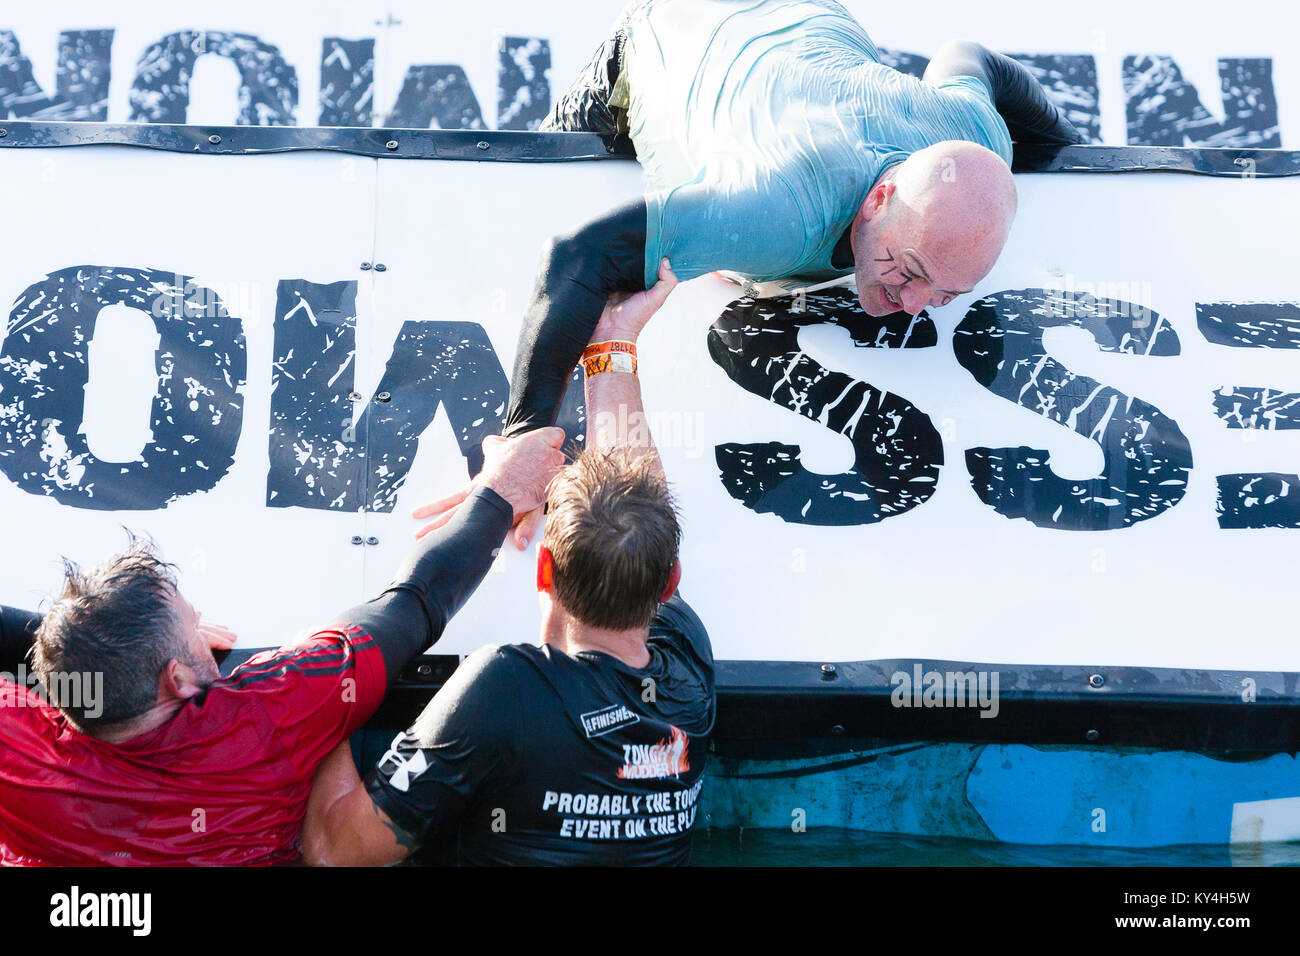 Sussex, UK. Two men pull a third over an hurdle on the Block Ness Monster obstacle during a Tough Mudder event. Stock Photo